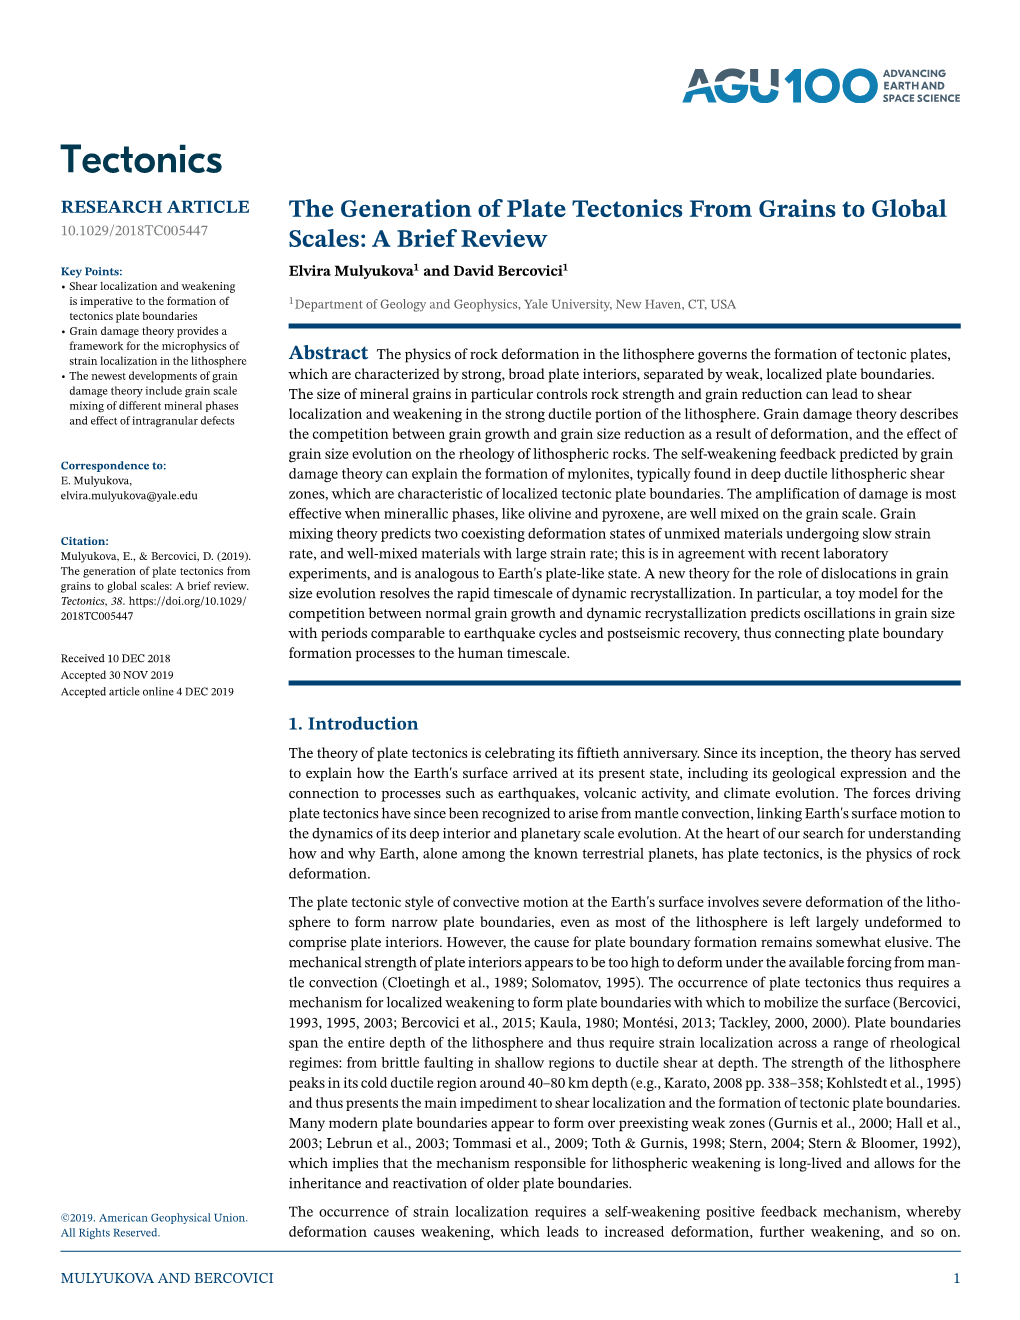 Origin of Plate Tectonics from Grains to Global Scales